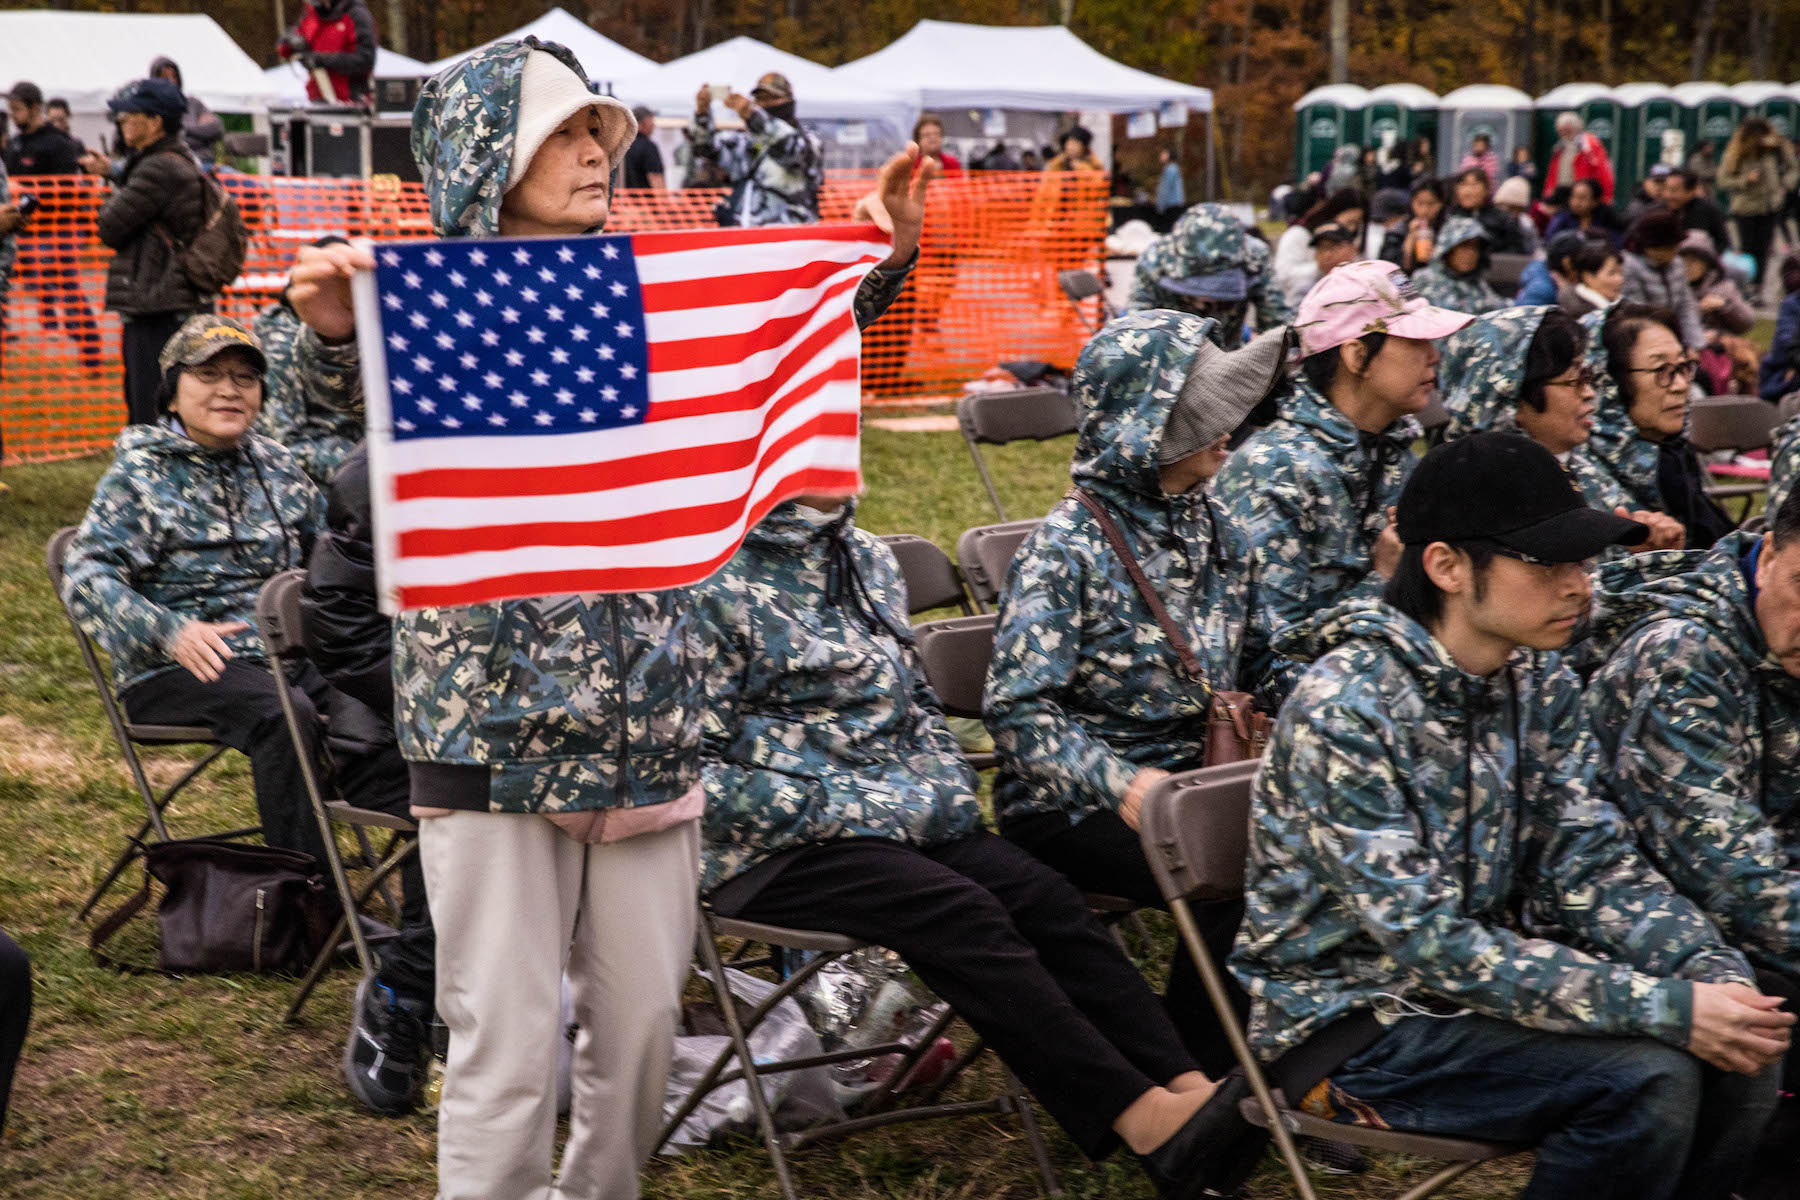 Pastor Moon's supporters from Japan and Korea soaked up the MAGA-friendly atmosphere. Many wore camo hoodies sold through the church.